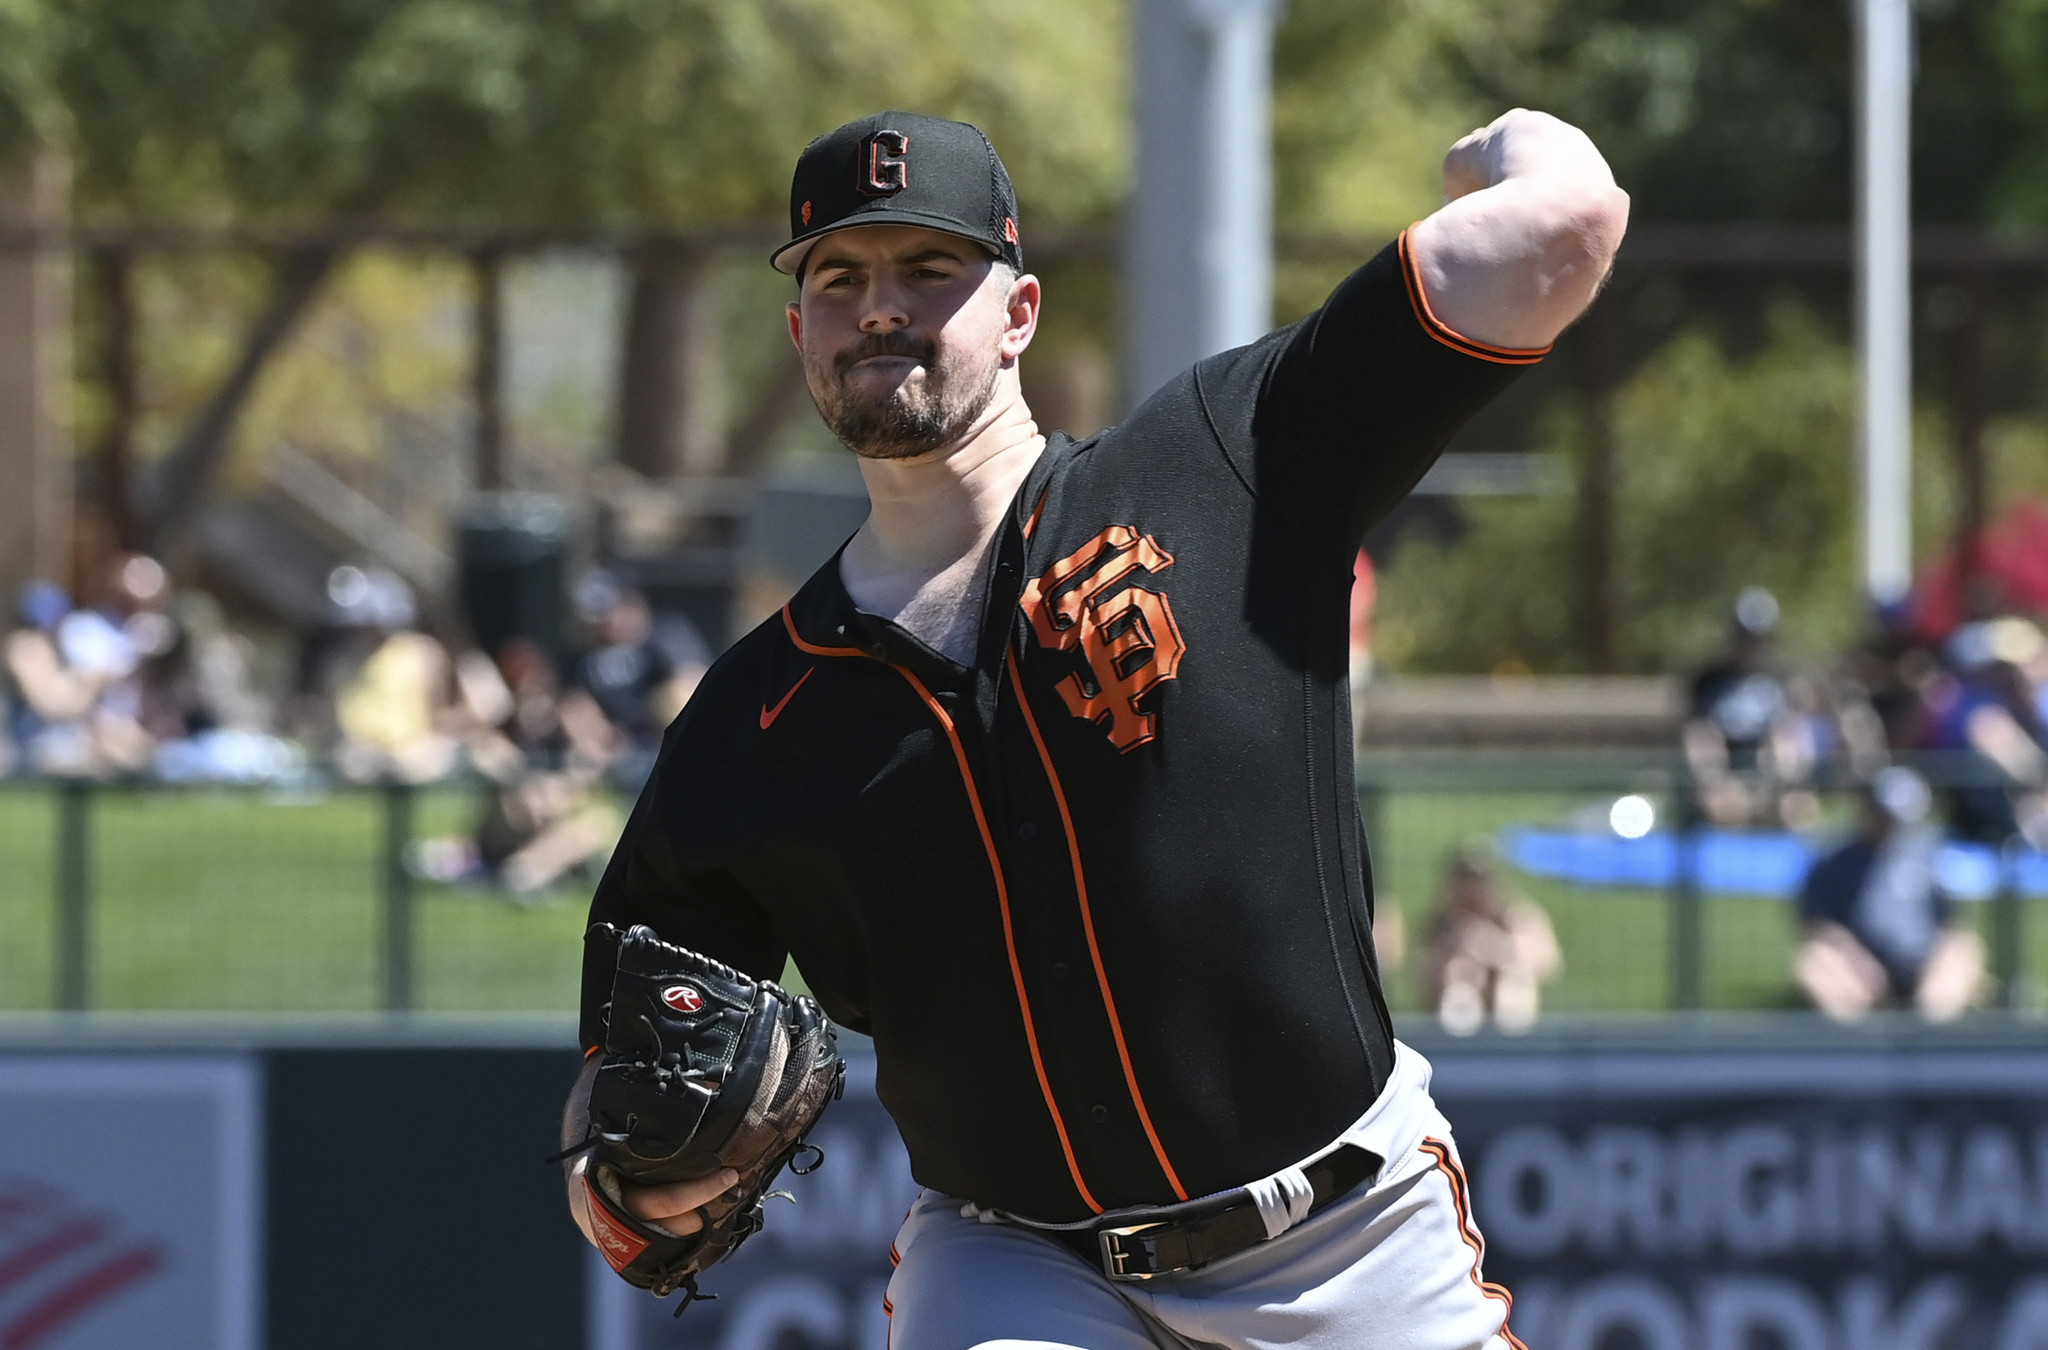 Chicago White Sox: Giants' Carlos Rodón faces his former team